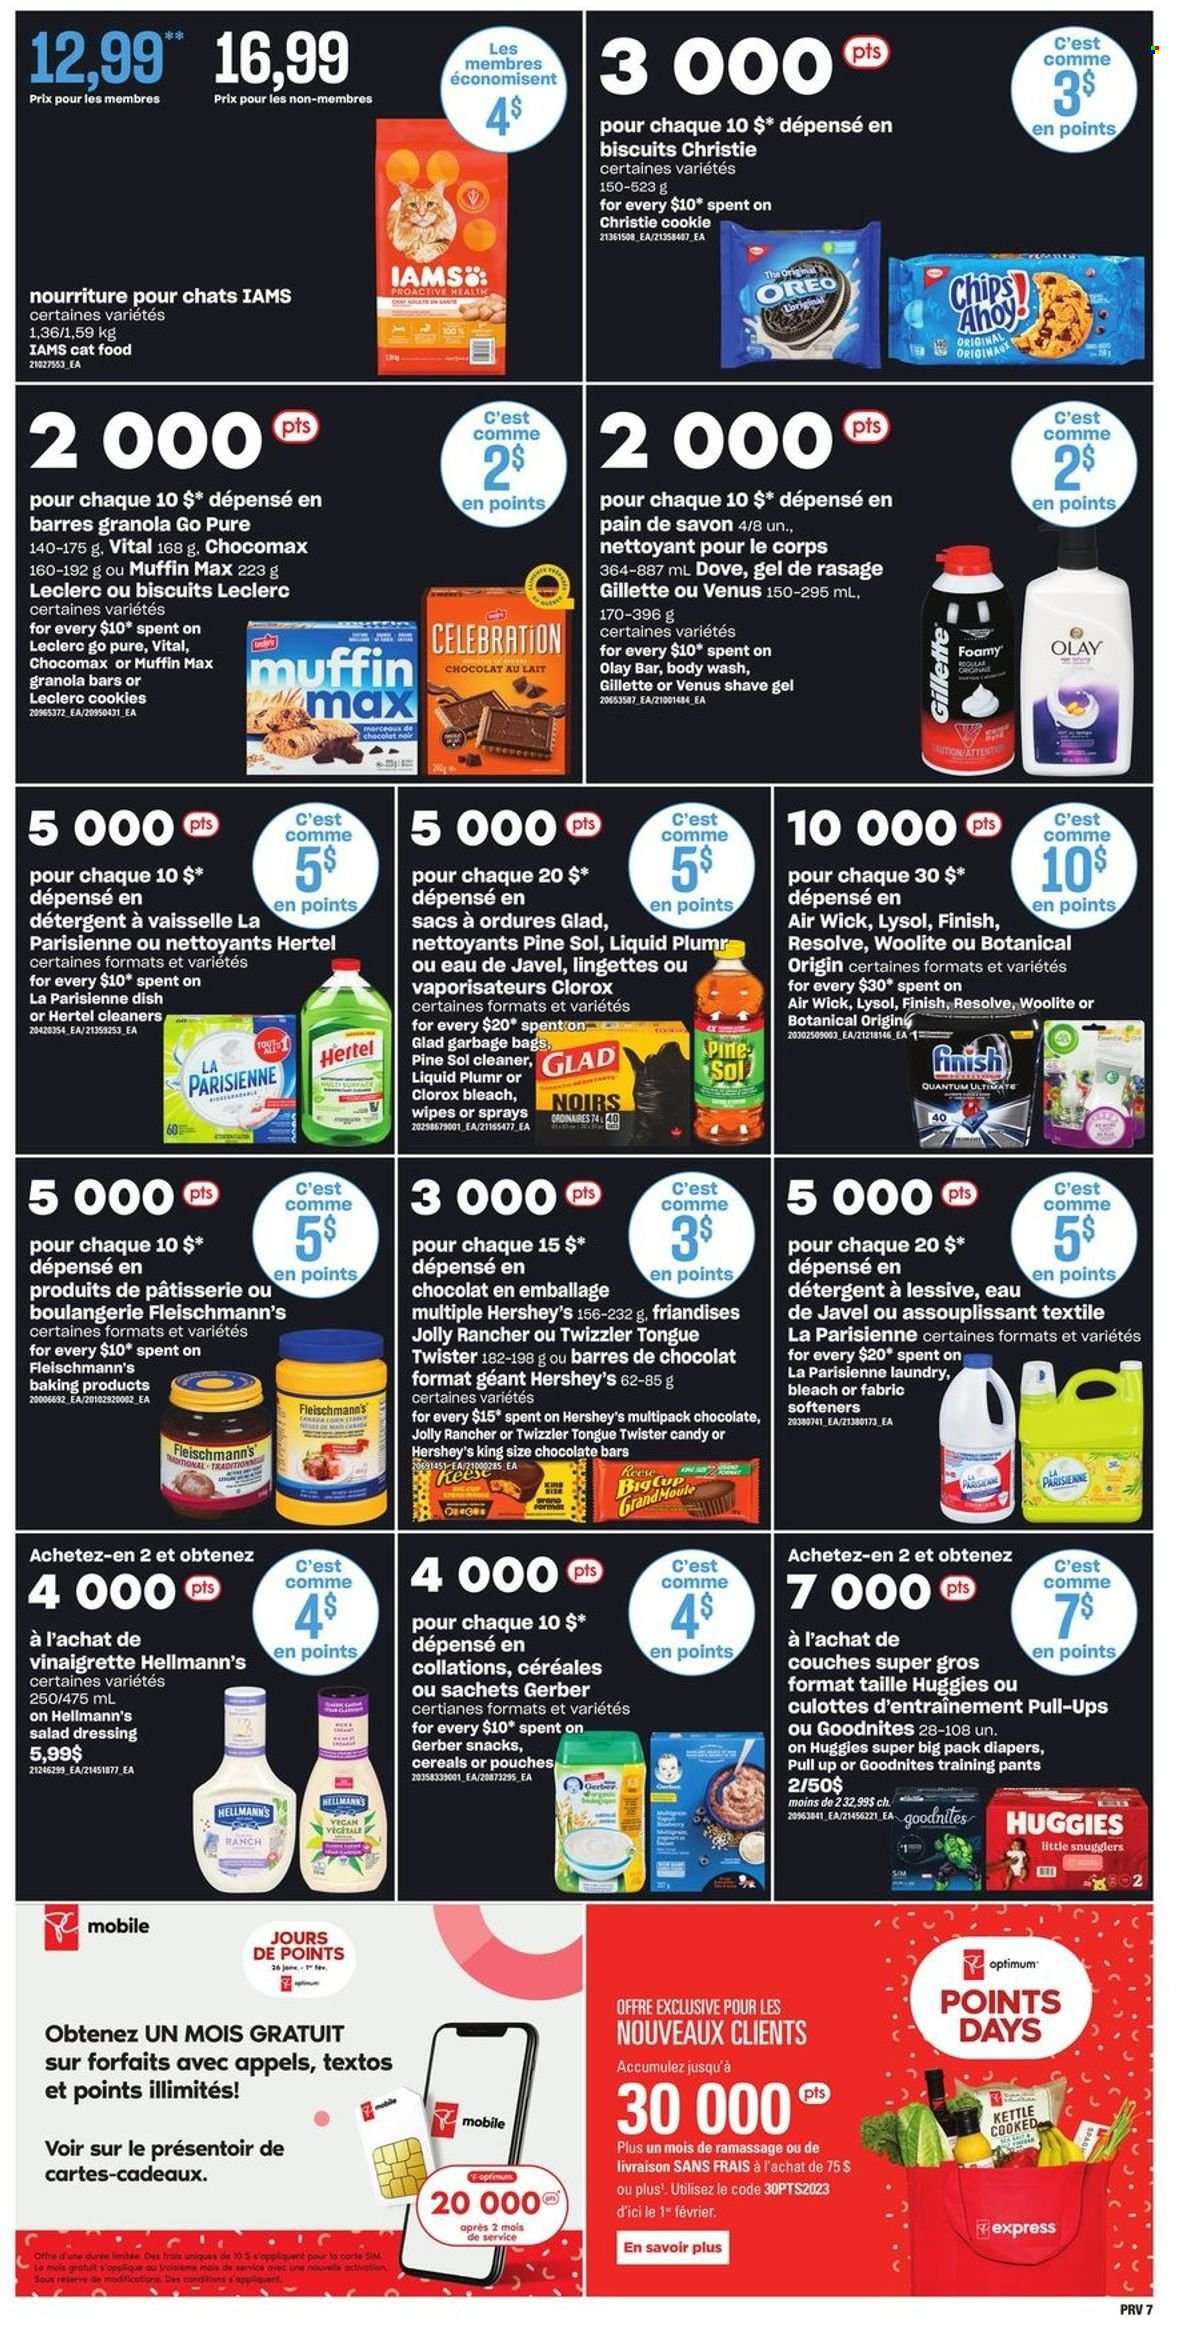 thumbnail - Provigo Flyer - January 26, 2023 - February 01, 2023 - Sales products - muffin, corn, Hellmann’s, Hershey's, cookies, Dove, snack, Celebration, biscuit, chocolate bar, Gerber, chips, cereals, granola bar, salad dressing, vinaigrette dressing, dressing, wipes, pants, nappies, baby pants, cleaner, bleach, Lysol, Clorox, Woolite, Pine-Sol, Finish Powerball, Finish Quantum Ultimate, body wash, Gillette, Olay, shave gel, Venus, Air Wick, animal food, cat food, Optimum, Iams, detergent, Huggies, Oreo, Twister. Page 8.